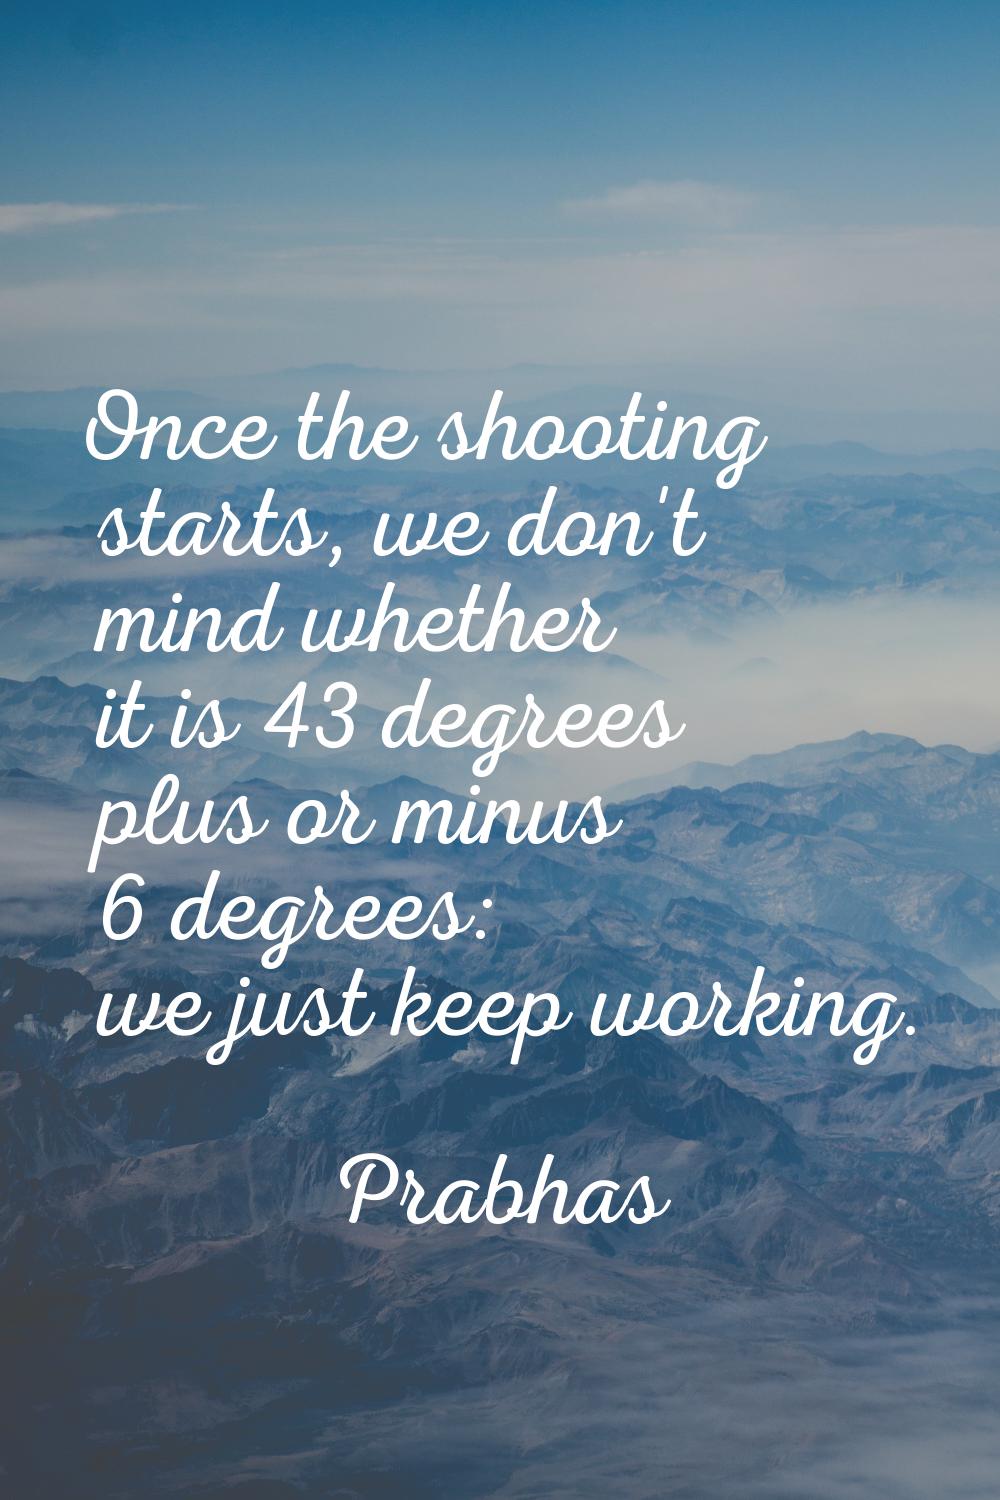 Once the shooting starts, we don't mind whether it is 43 degrees plus or minus 6 degrees: we just k